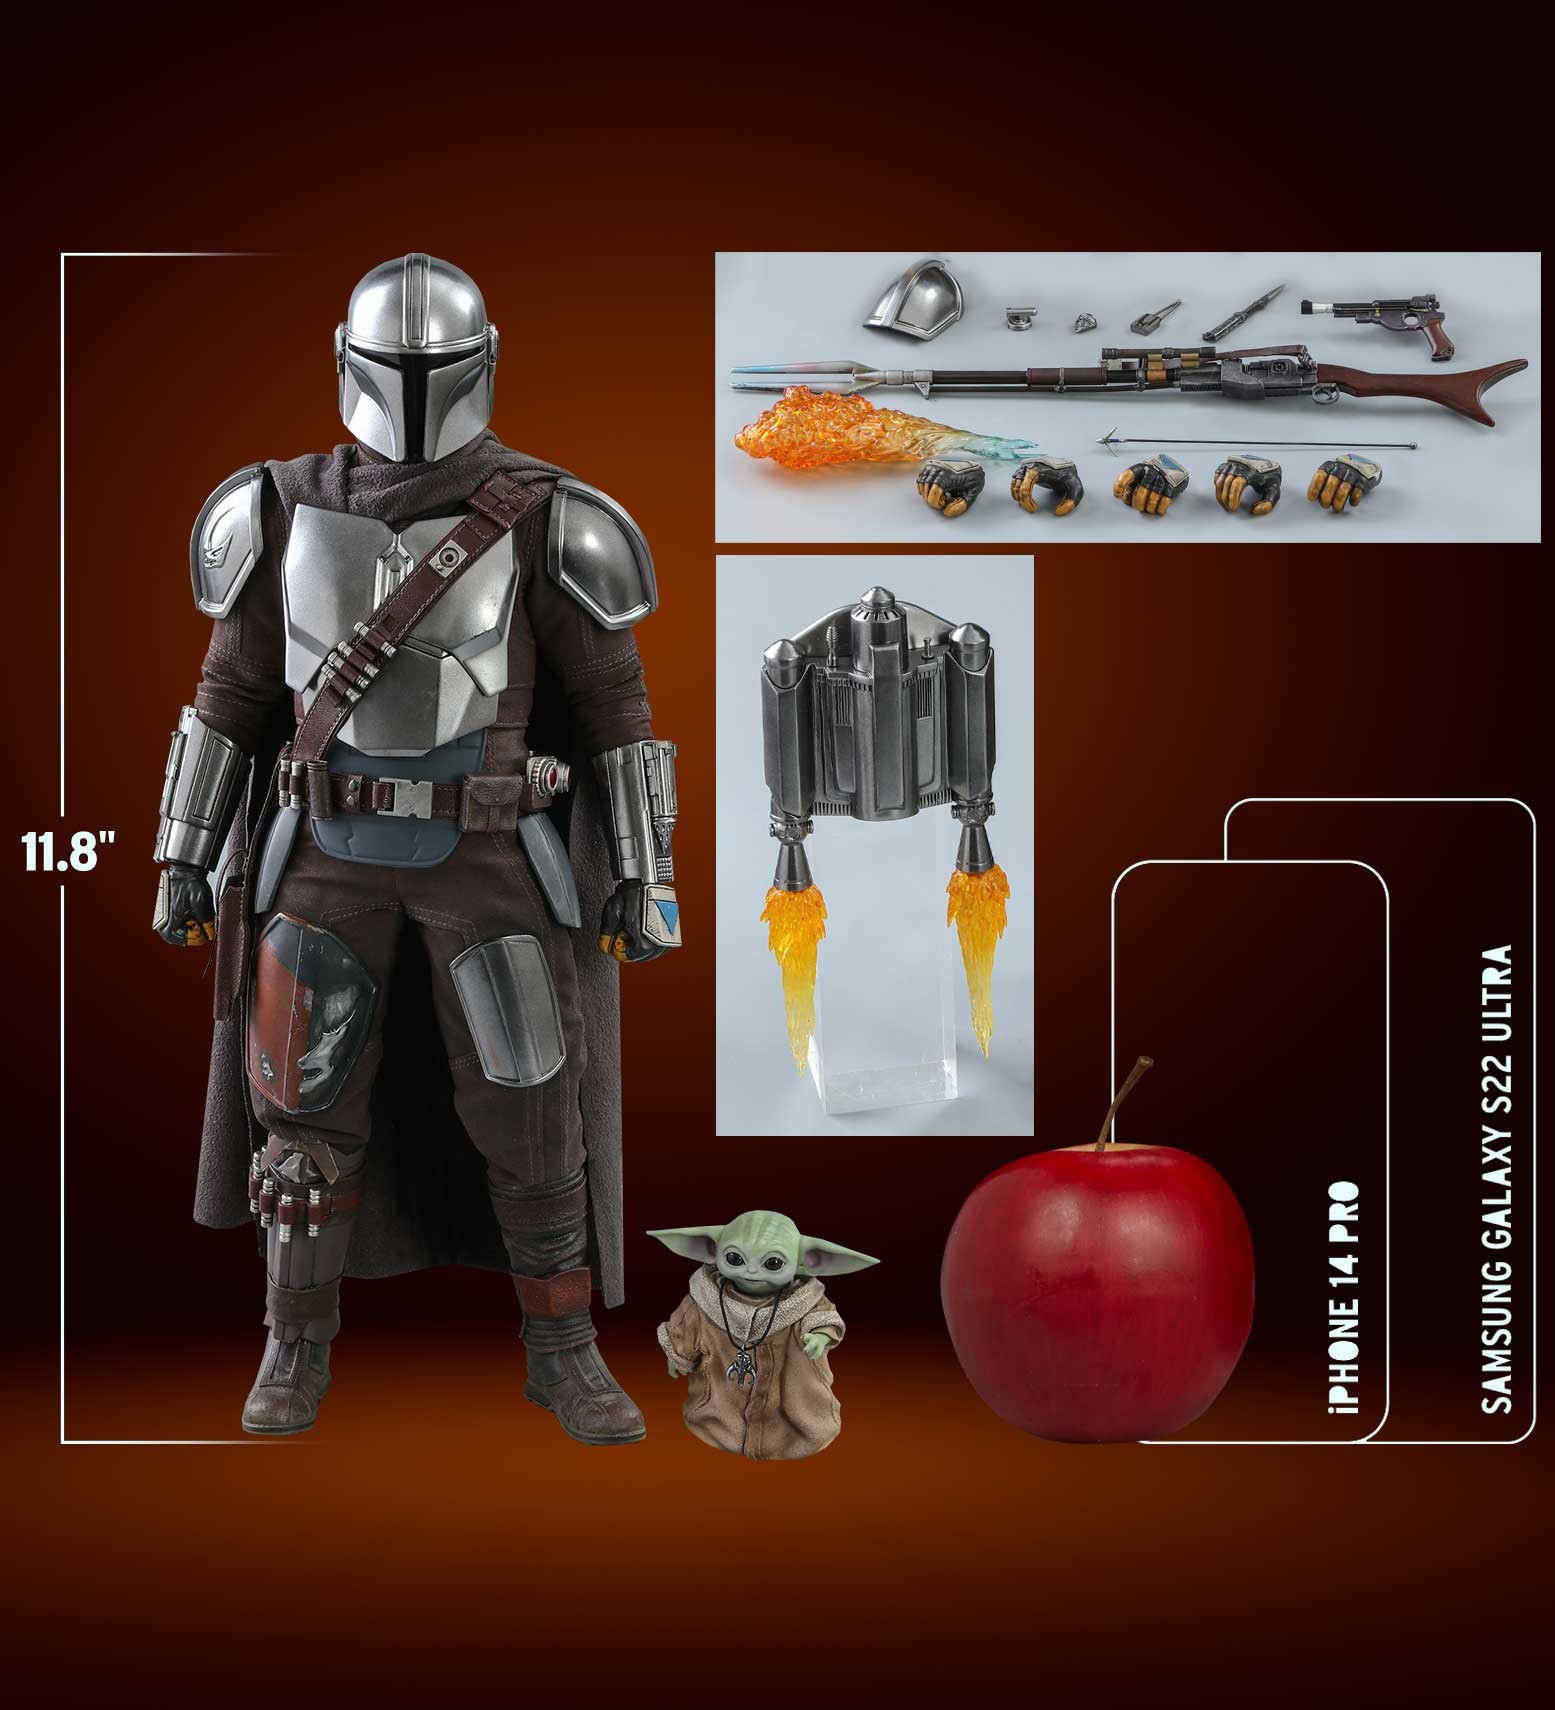 The Mandalorian and The Child Collector Edition (Prototype Shown) View 2